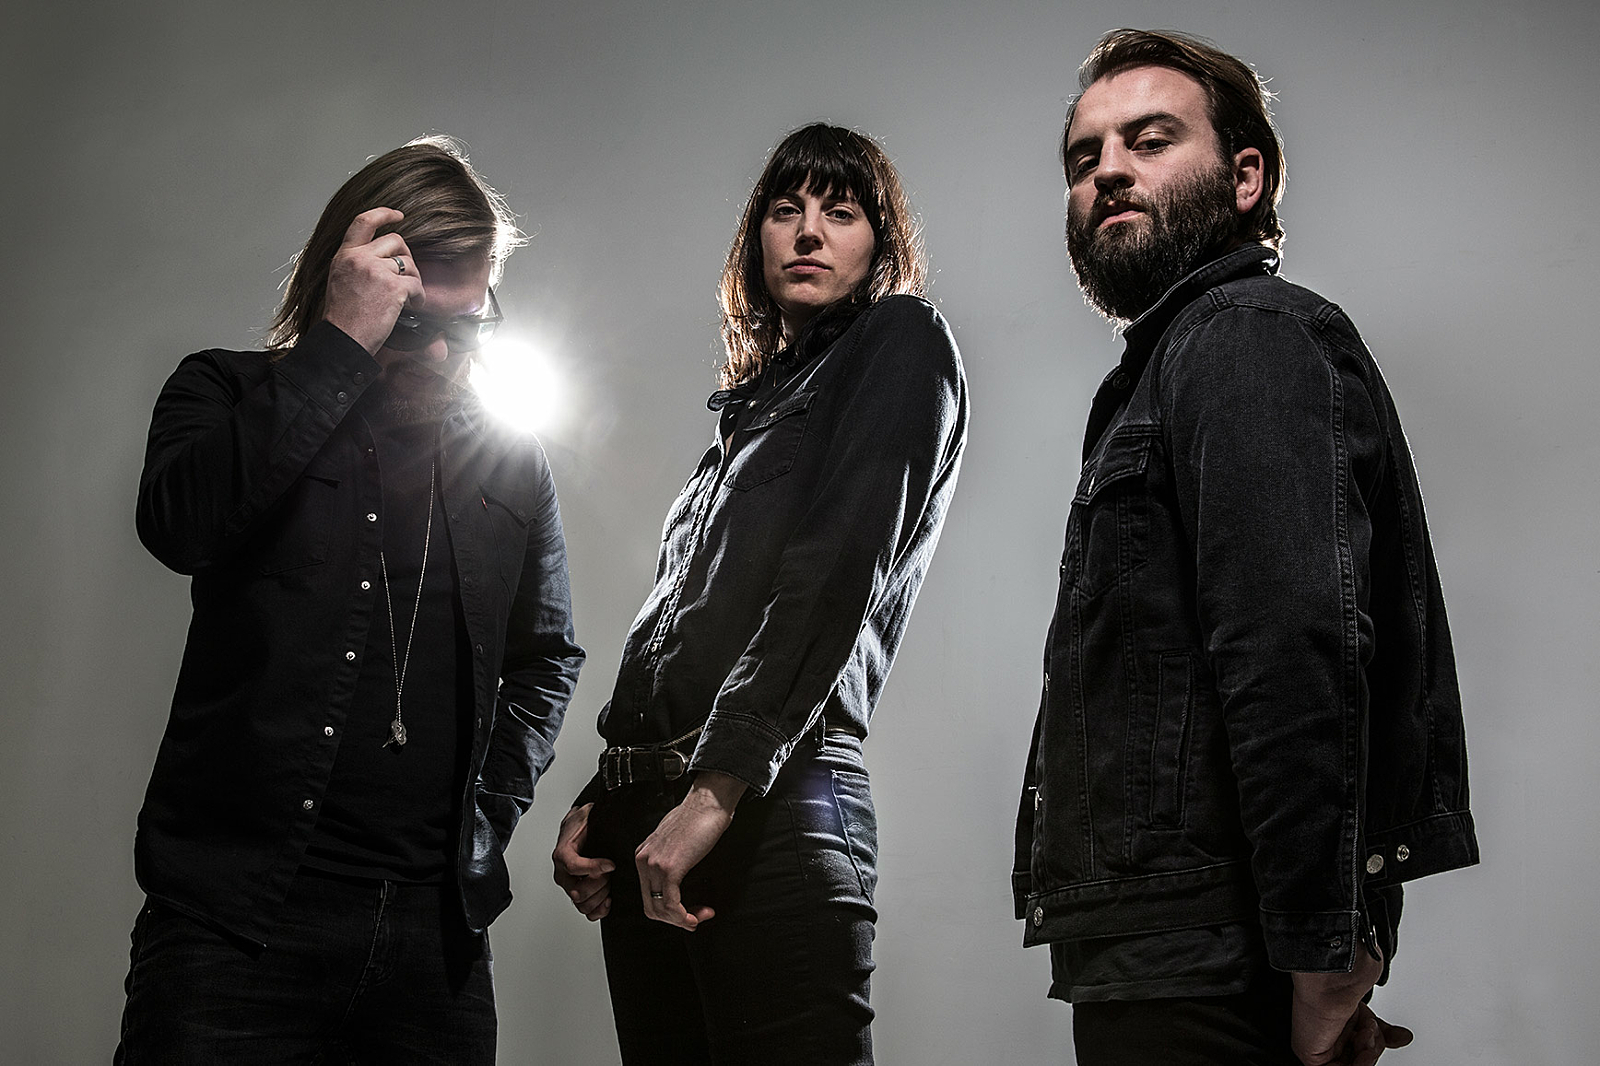 Band of Skulls excel on new track 'So Good'